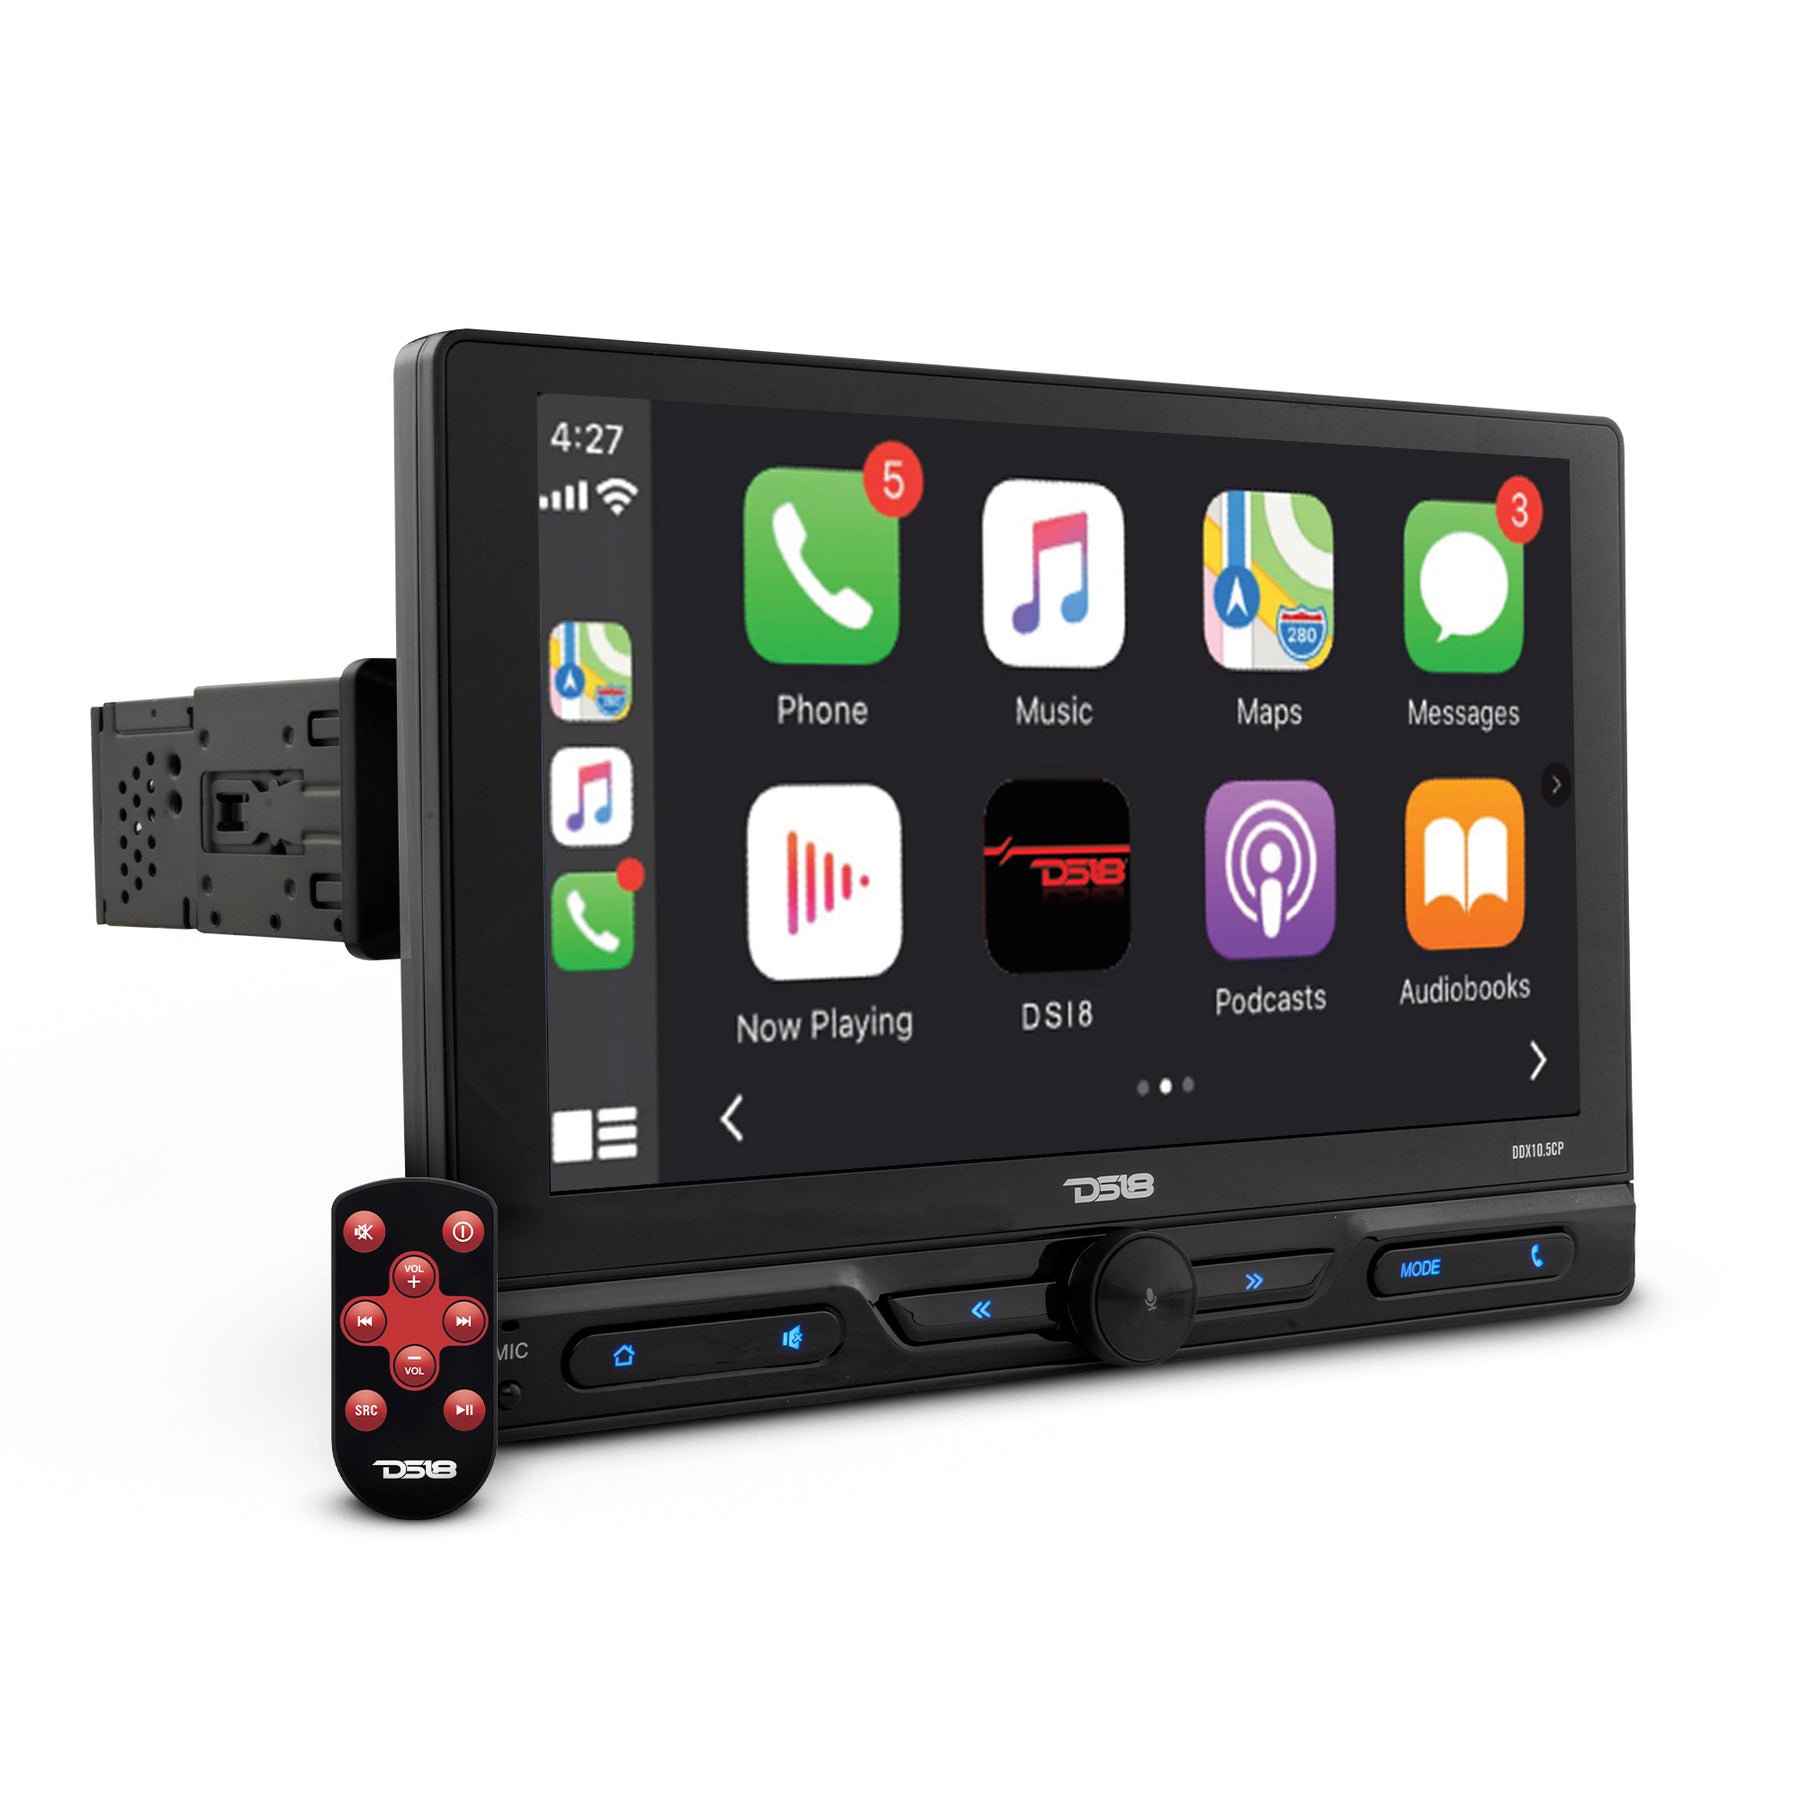 2 DIN Car Stereo, Touchscreen Android Multimedia